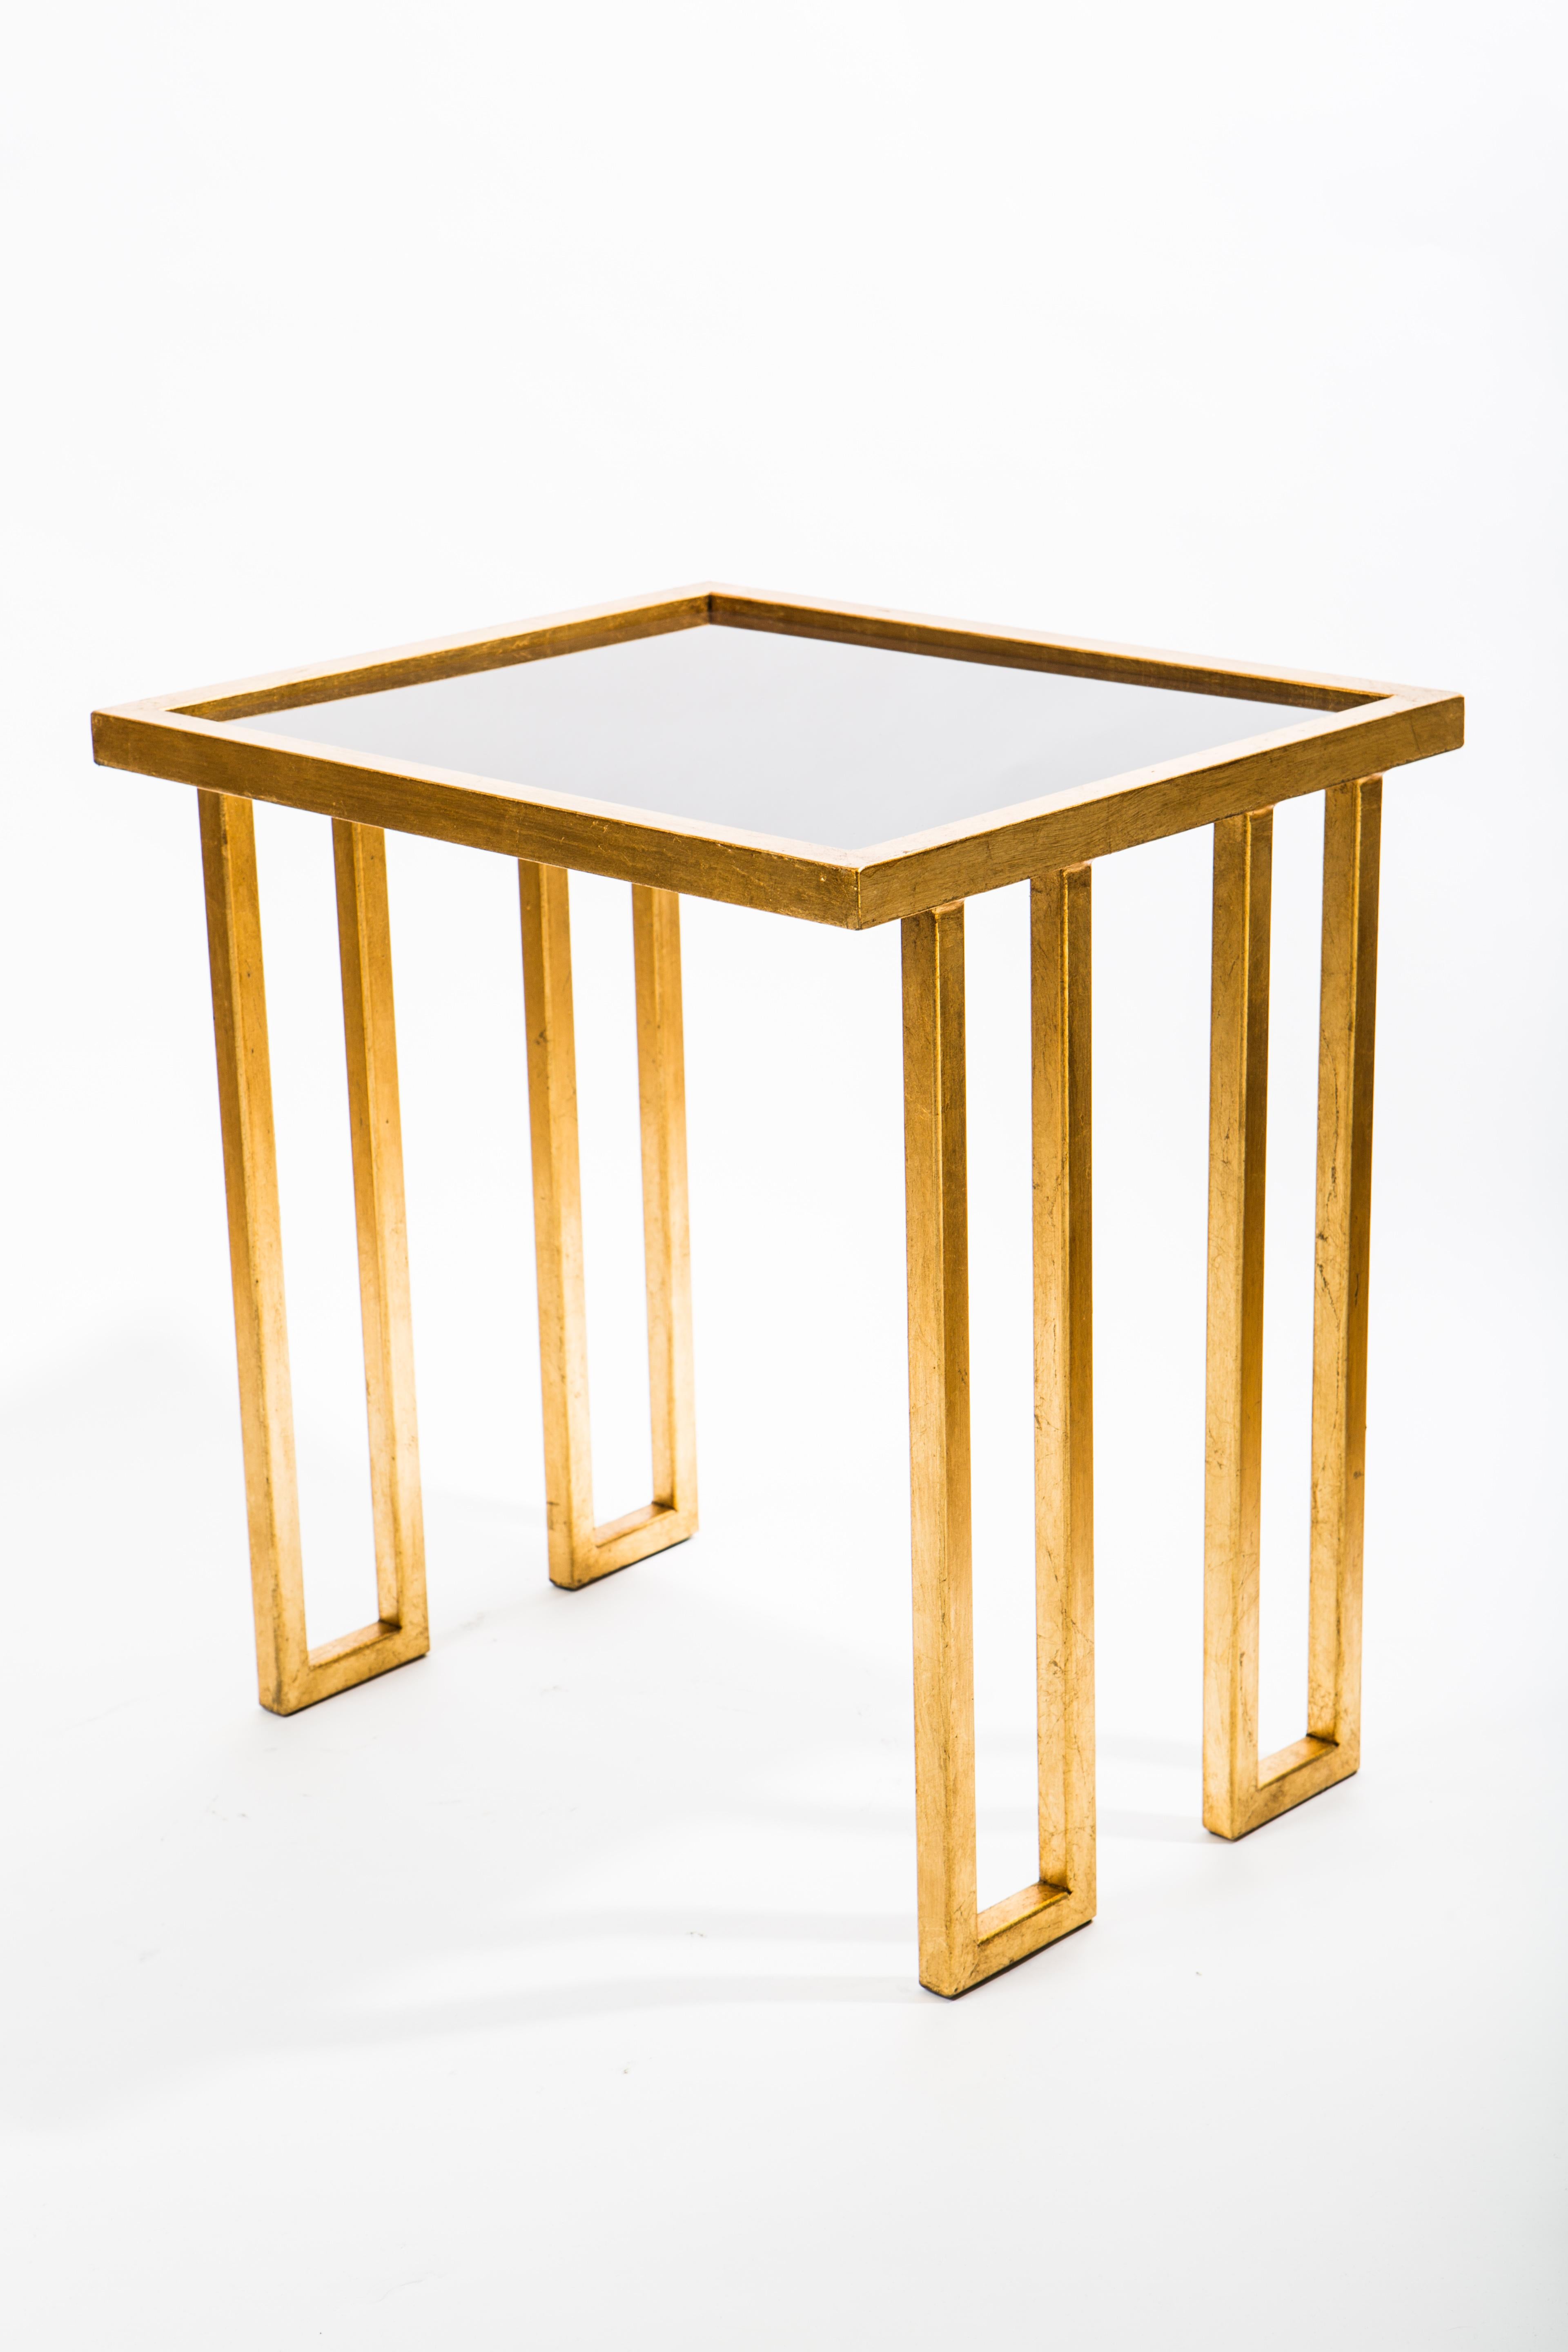 Late 20th Century Li Puma Firenze Unique Nesting Tables in 24 Ct Gold Leaf with Bronze Glass Tops For Sale